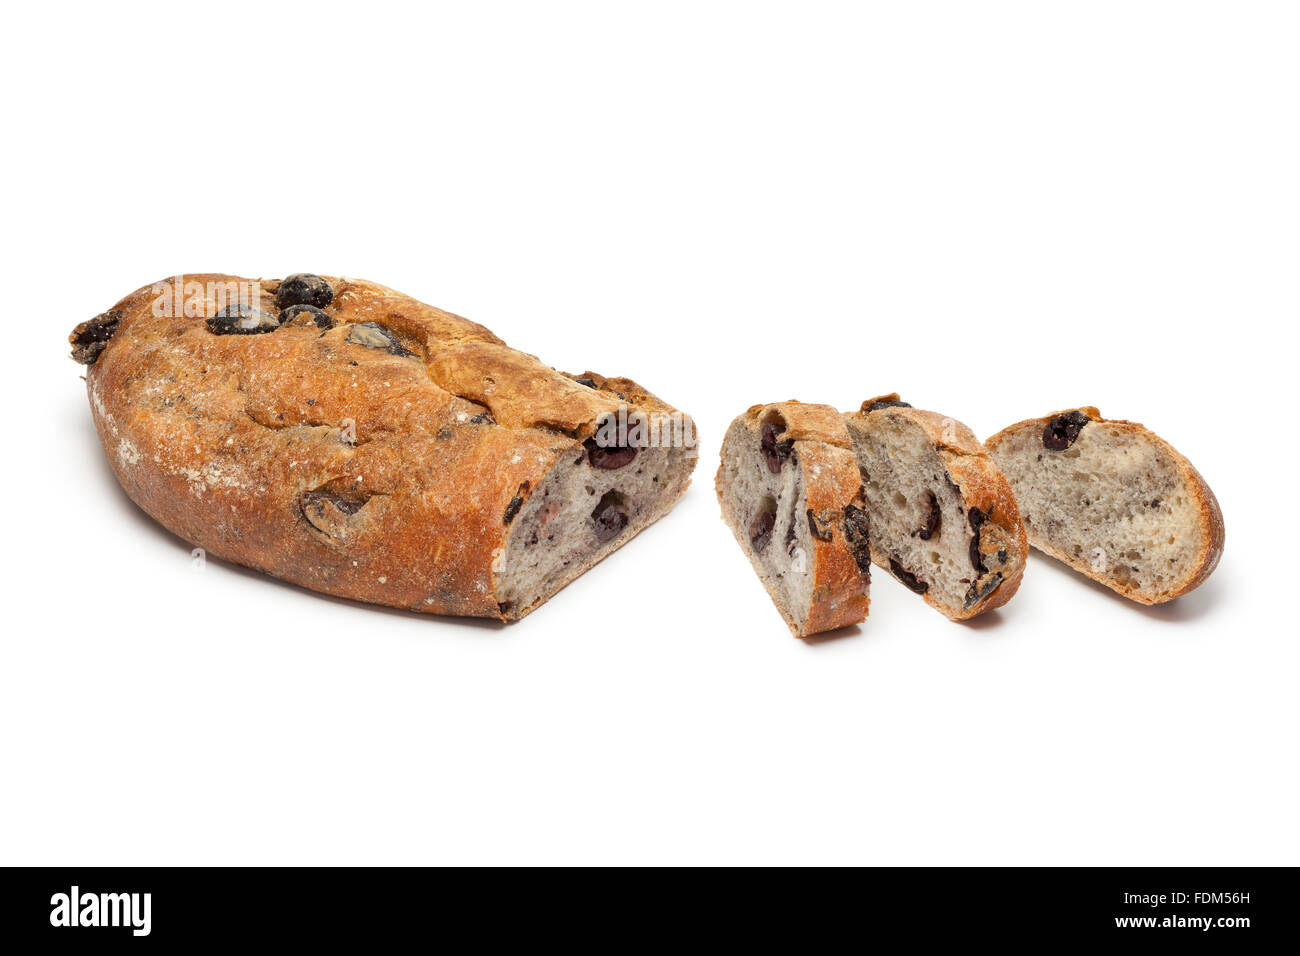 Fresh whole wheat black olive bread and slices on white background Stock Photo